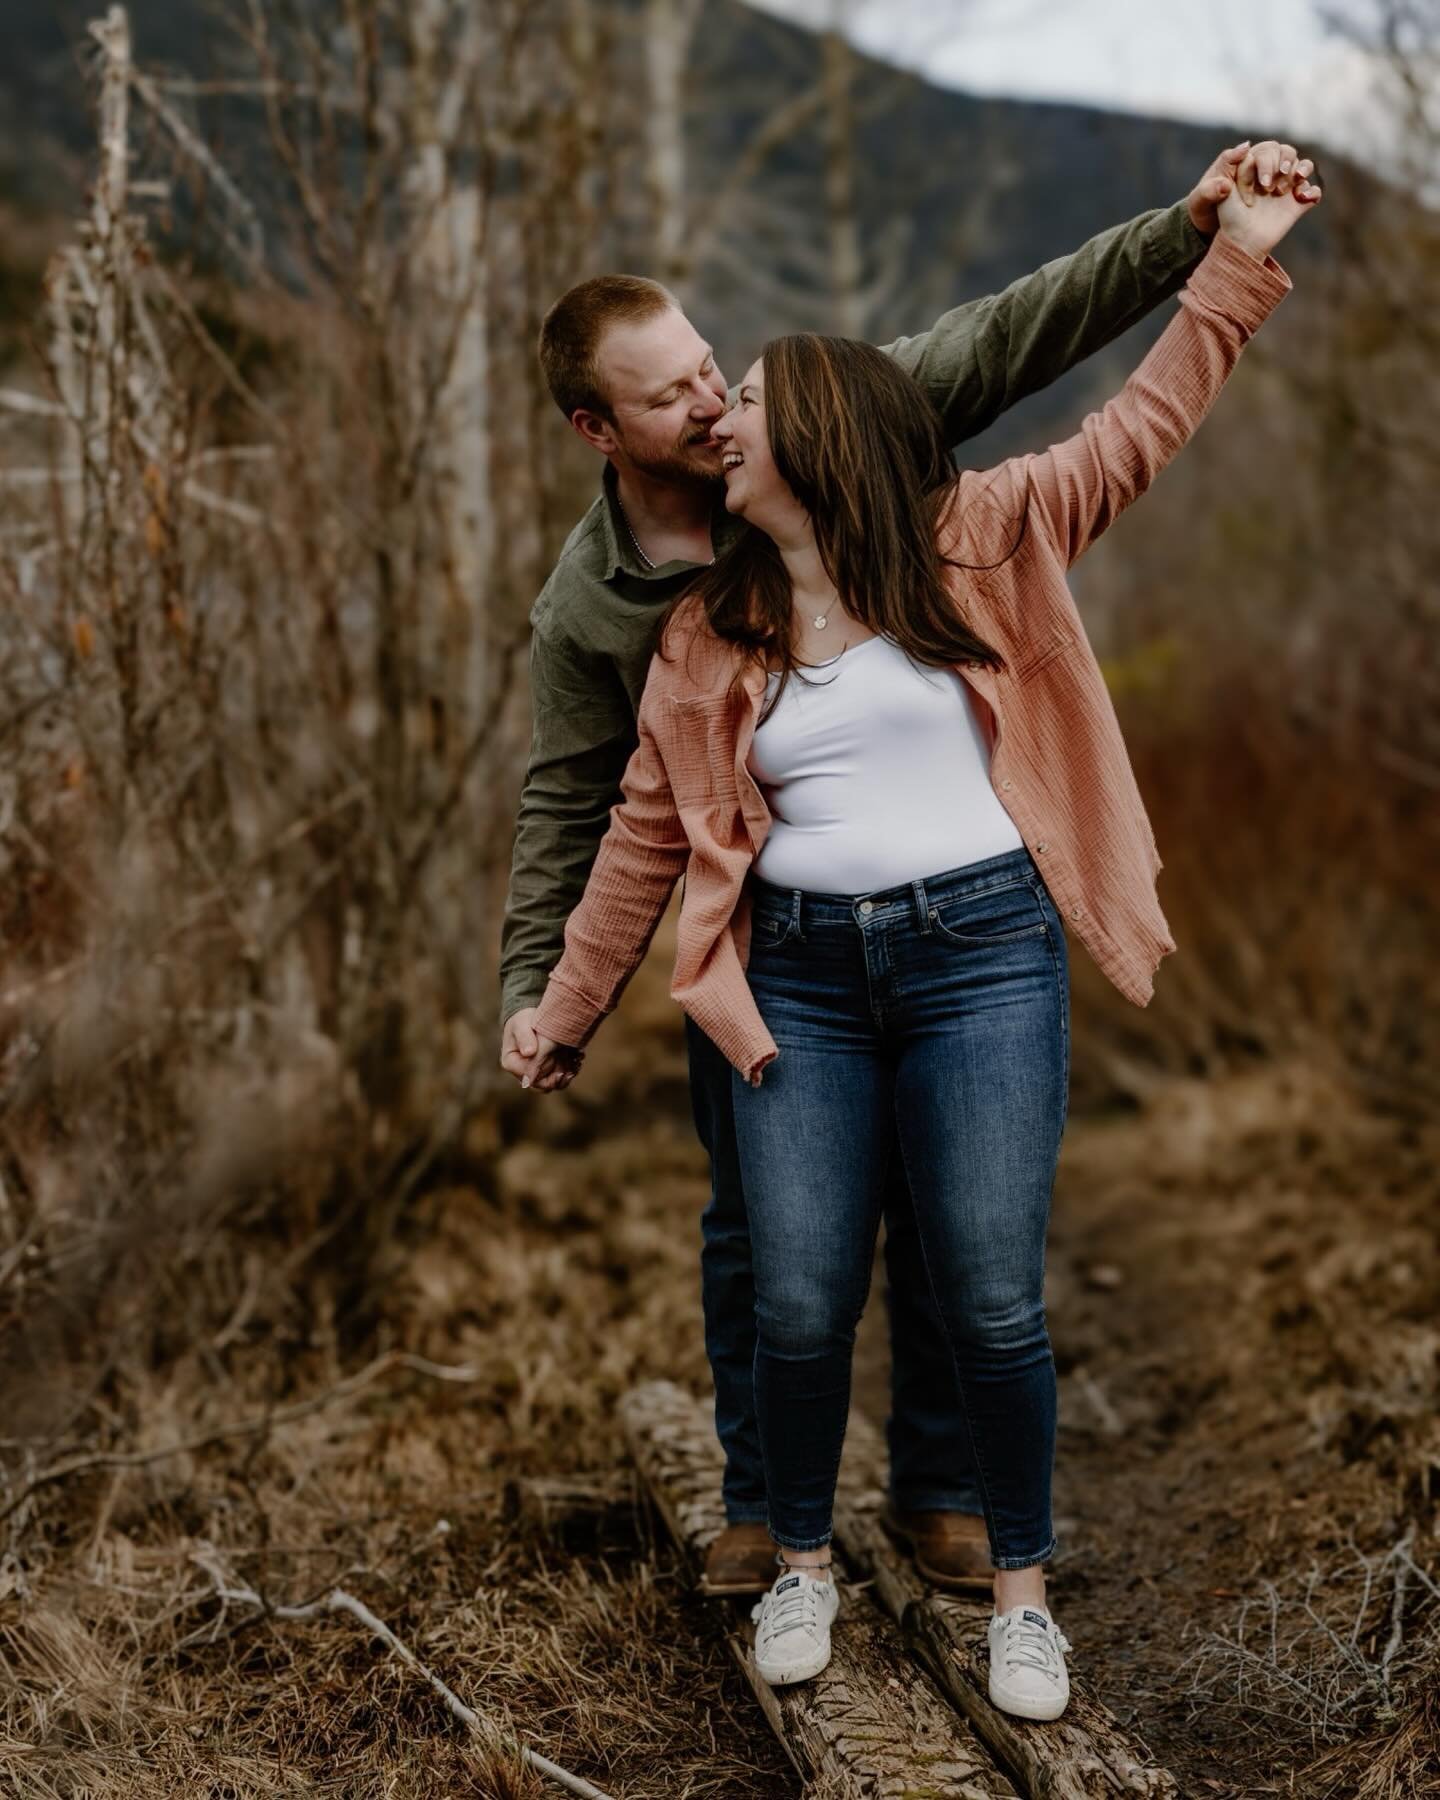 Sunshine and spring engagement sessions are in full swing!  A&amp;M&rsquo;s session was one where all we did was giggle and play for the entire hour, and it was THE BEST!

The love between A&amp;M is electric; we were all so connected during our sess